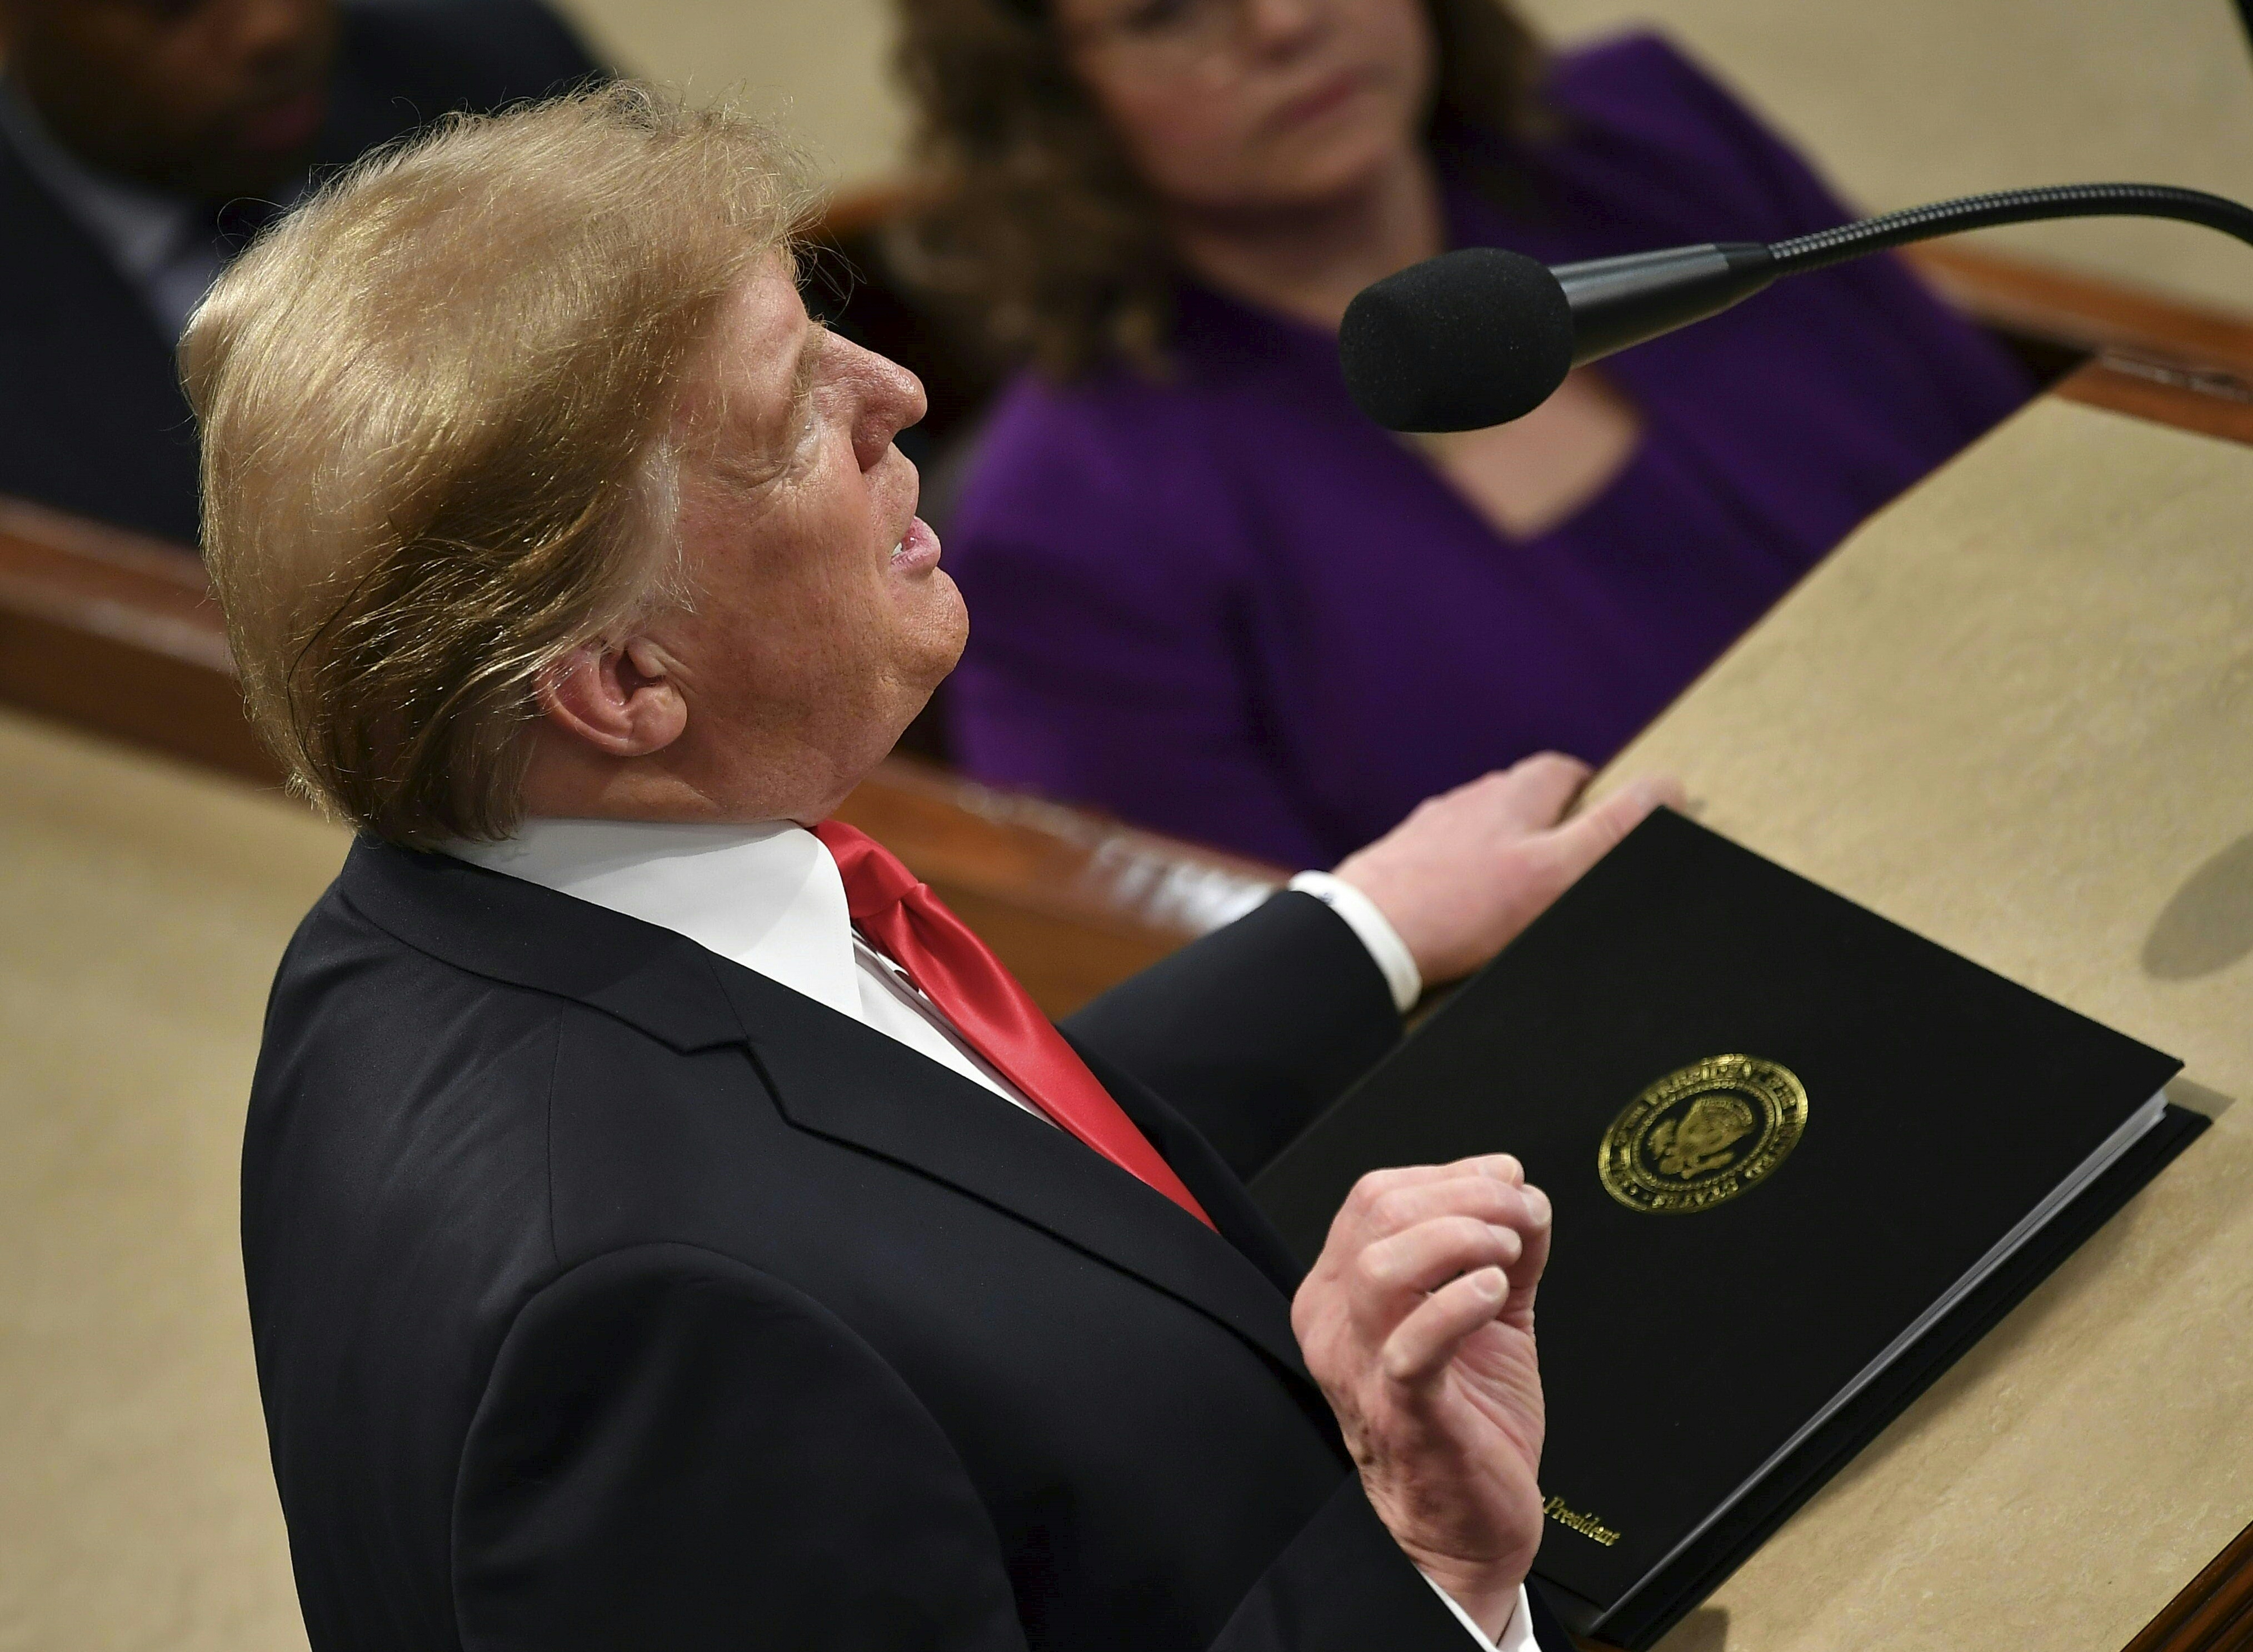 US President Donald Trump makes a point as he delivers the State of the Union address at the US Capitol in Washington, DC, on February 5, 2019. (MANDEL NGAN/AFP/Getty Images)